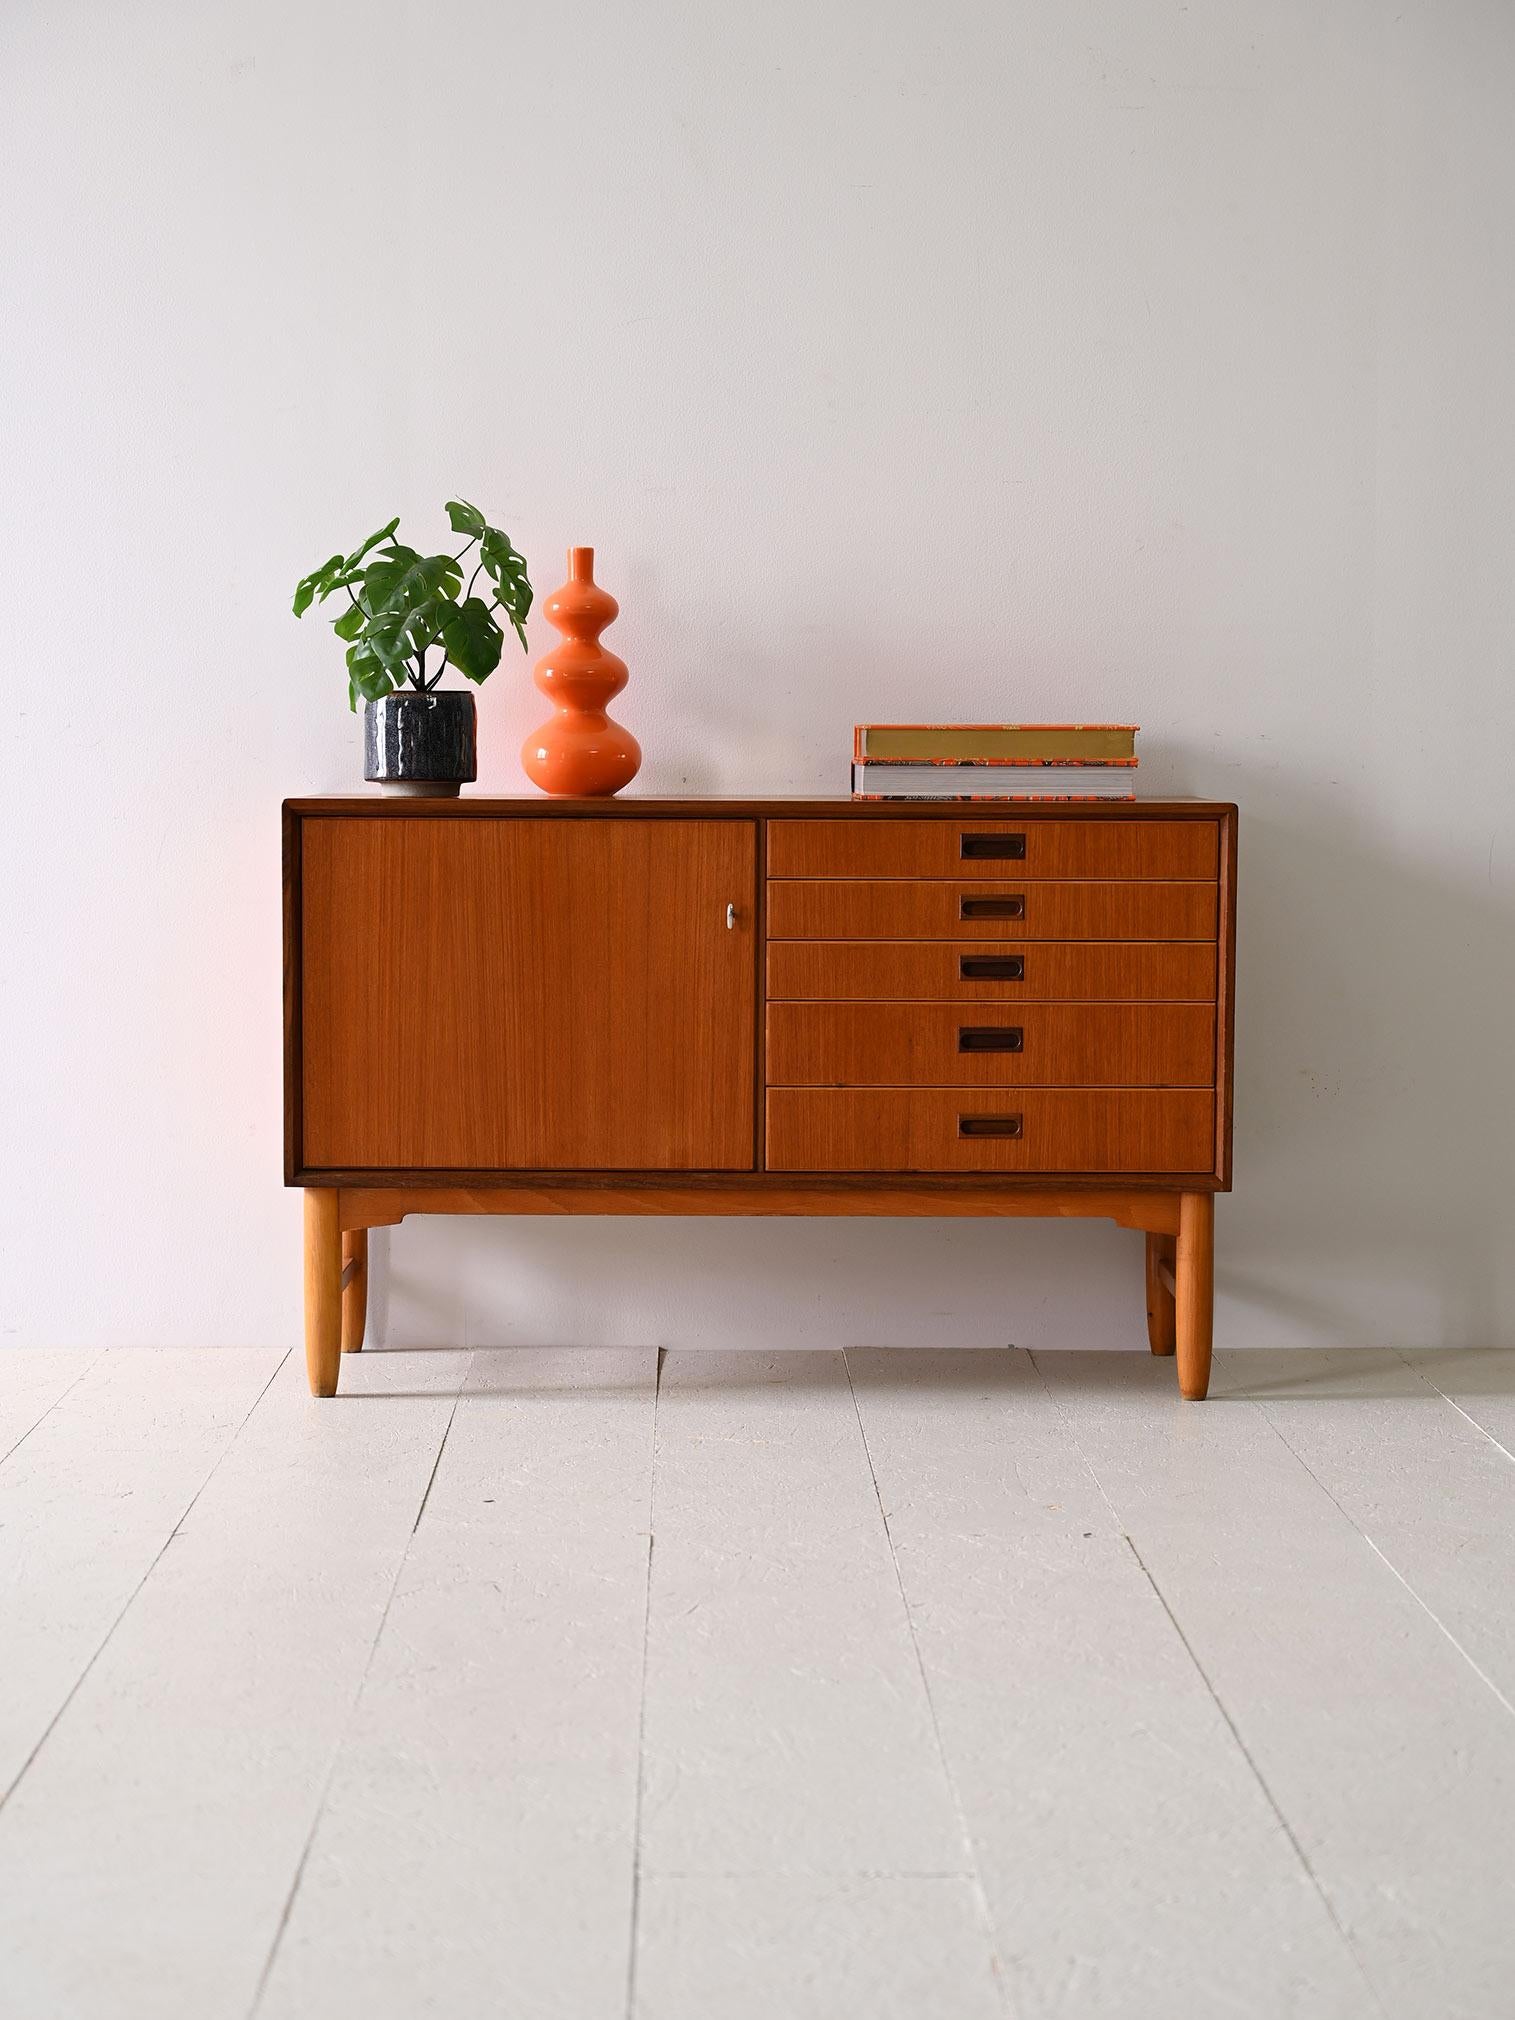 Original 1960s vintage sideboard cabinet with drawers and storage compartment.

There are 4 drawers with a carved wooden handle. The storage compartment is closed by a hinged door equipped with a lock.
An elegant and versatile piece of furniture